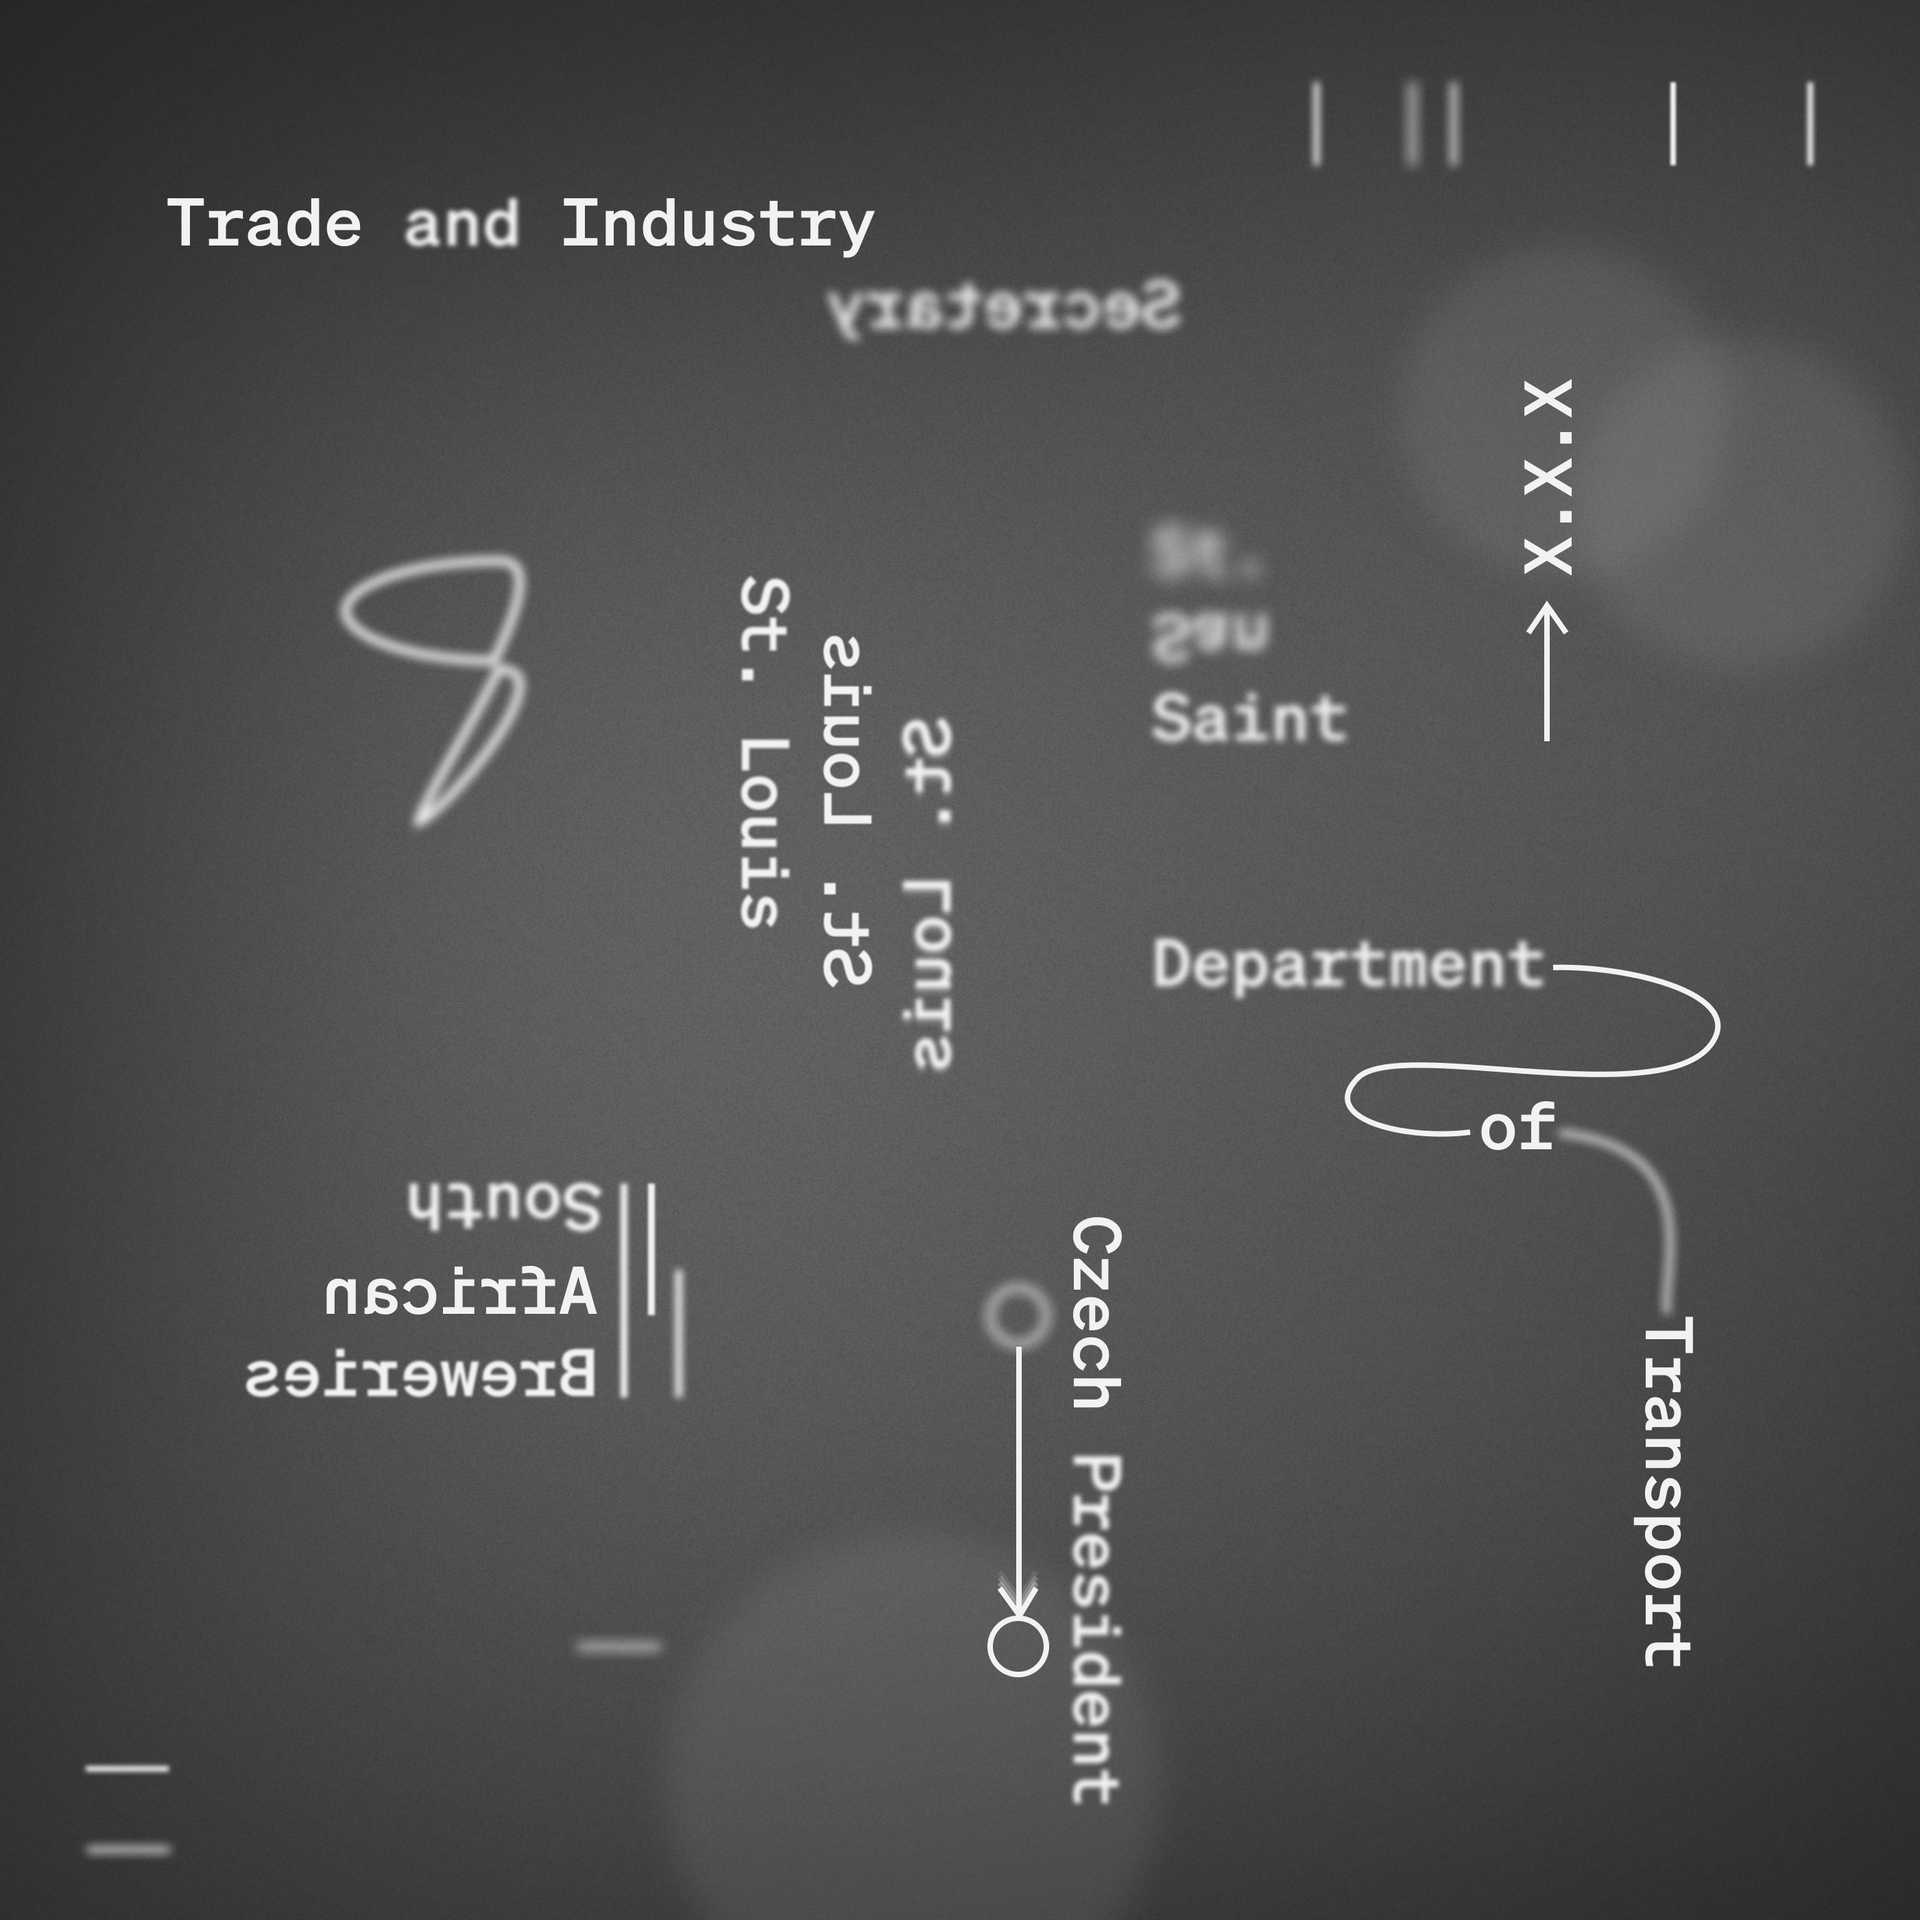 Stylized name chunks, including “St. Louis”, “South African Breweries”, “Department of Transaport” among others